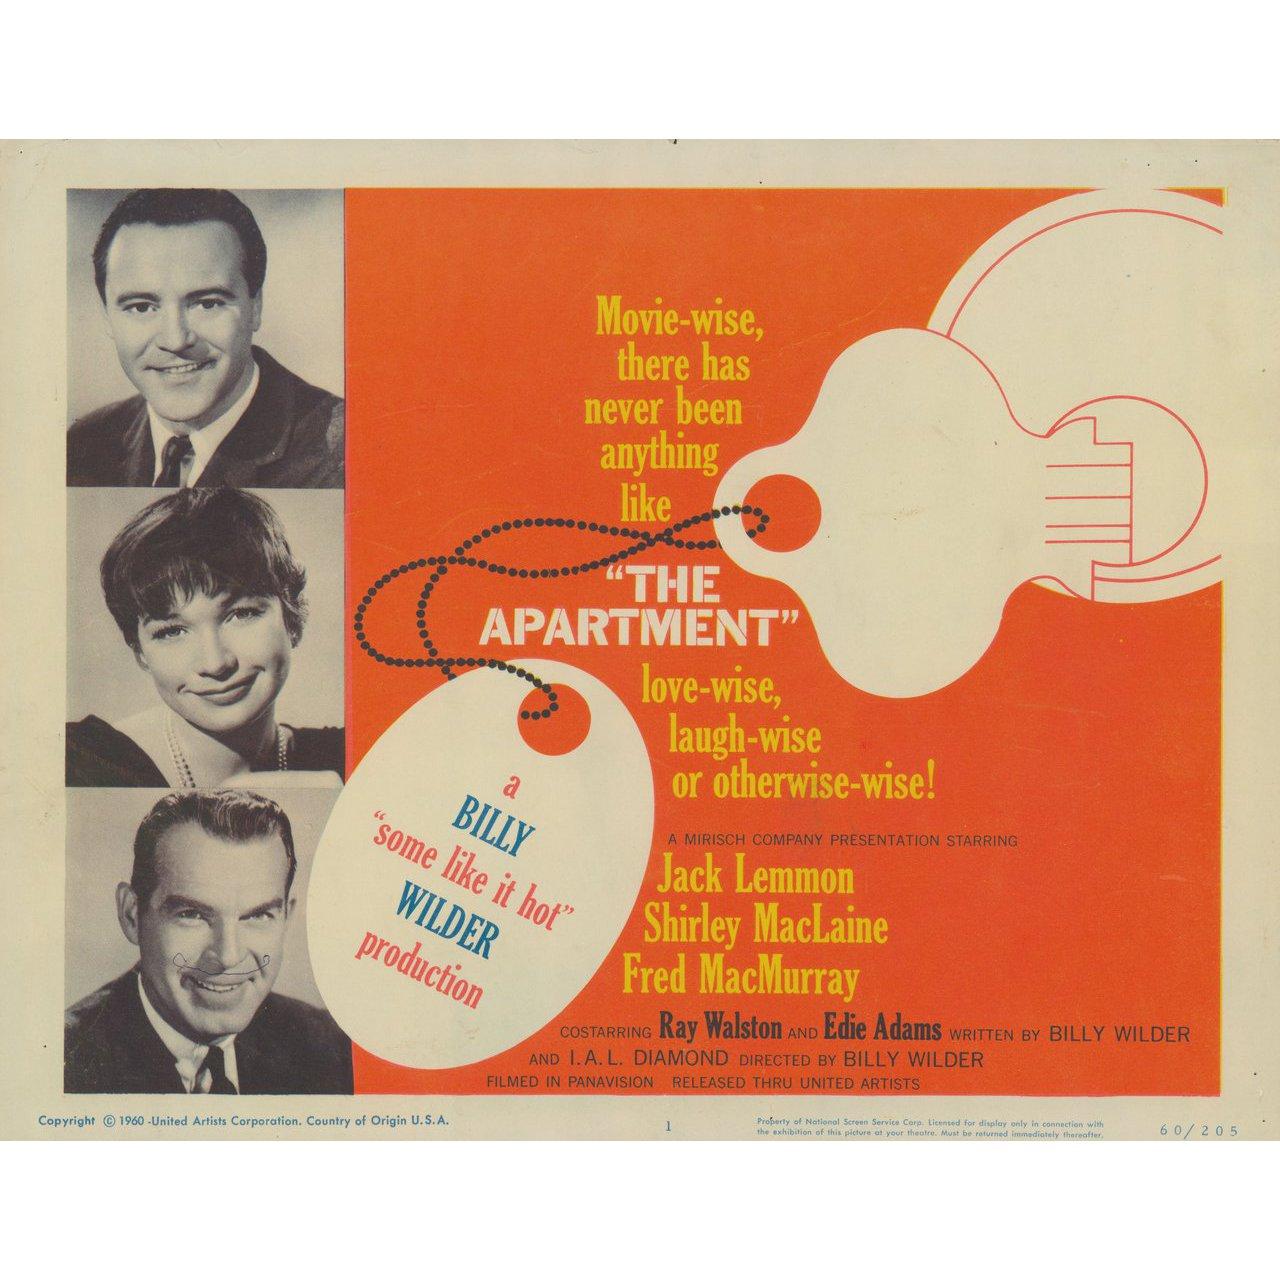 Original 1960 U.S. title card for the film The Apartment directed by Billy Wilder with Jack Lemmon / Shirley MacLaine / Fred MacMurray / Ray Walston. Very Good condition, creased w/ pen mark. Please note: the size is stated in inches and the actual